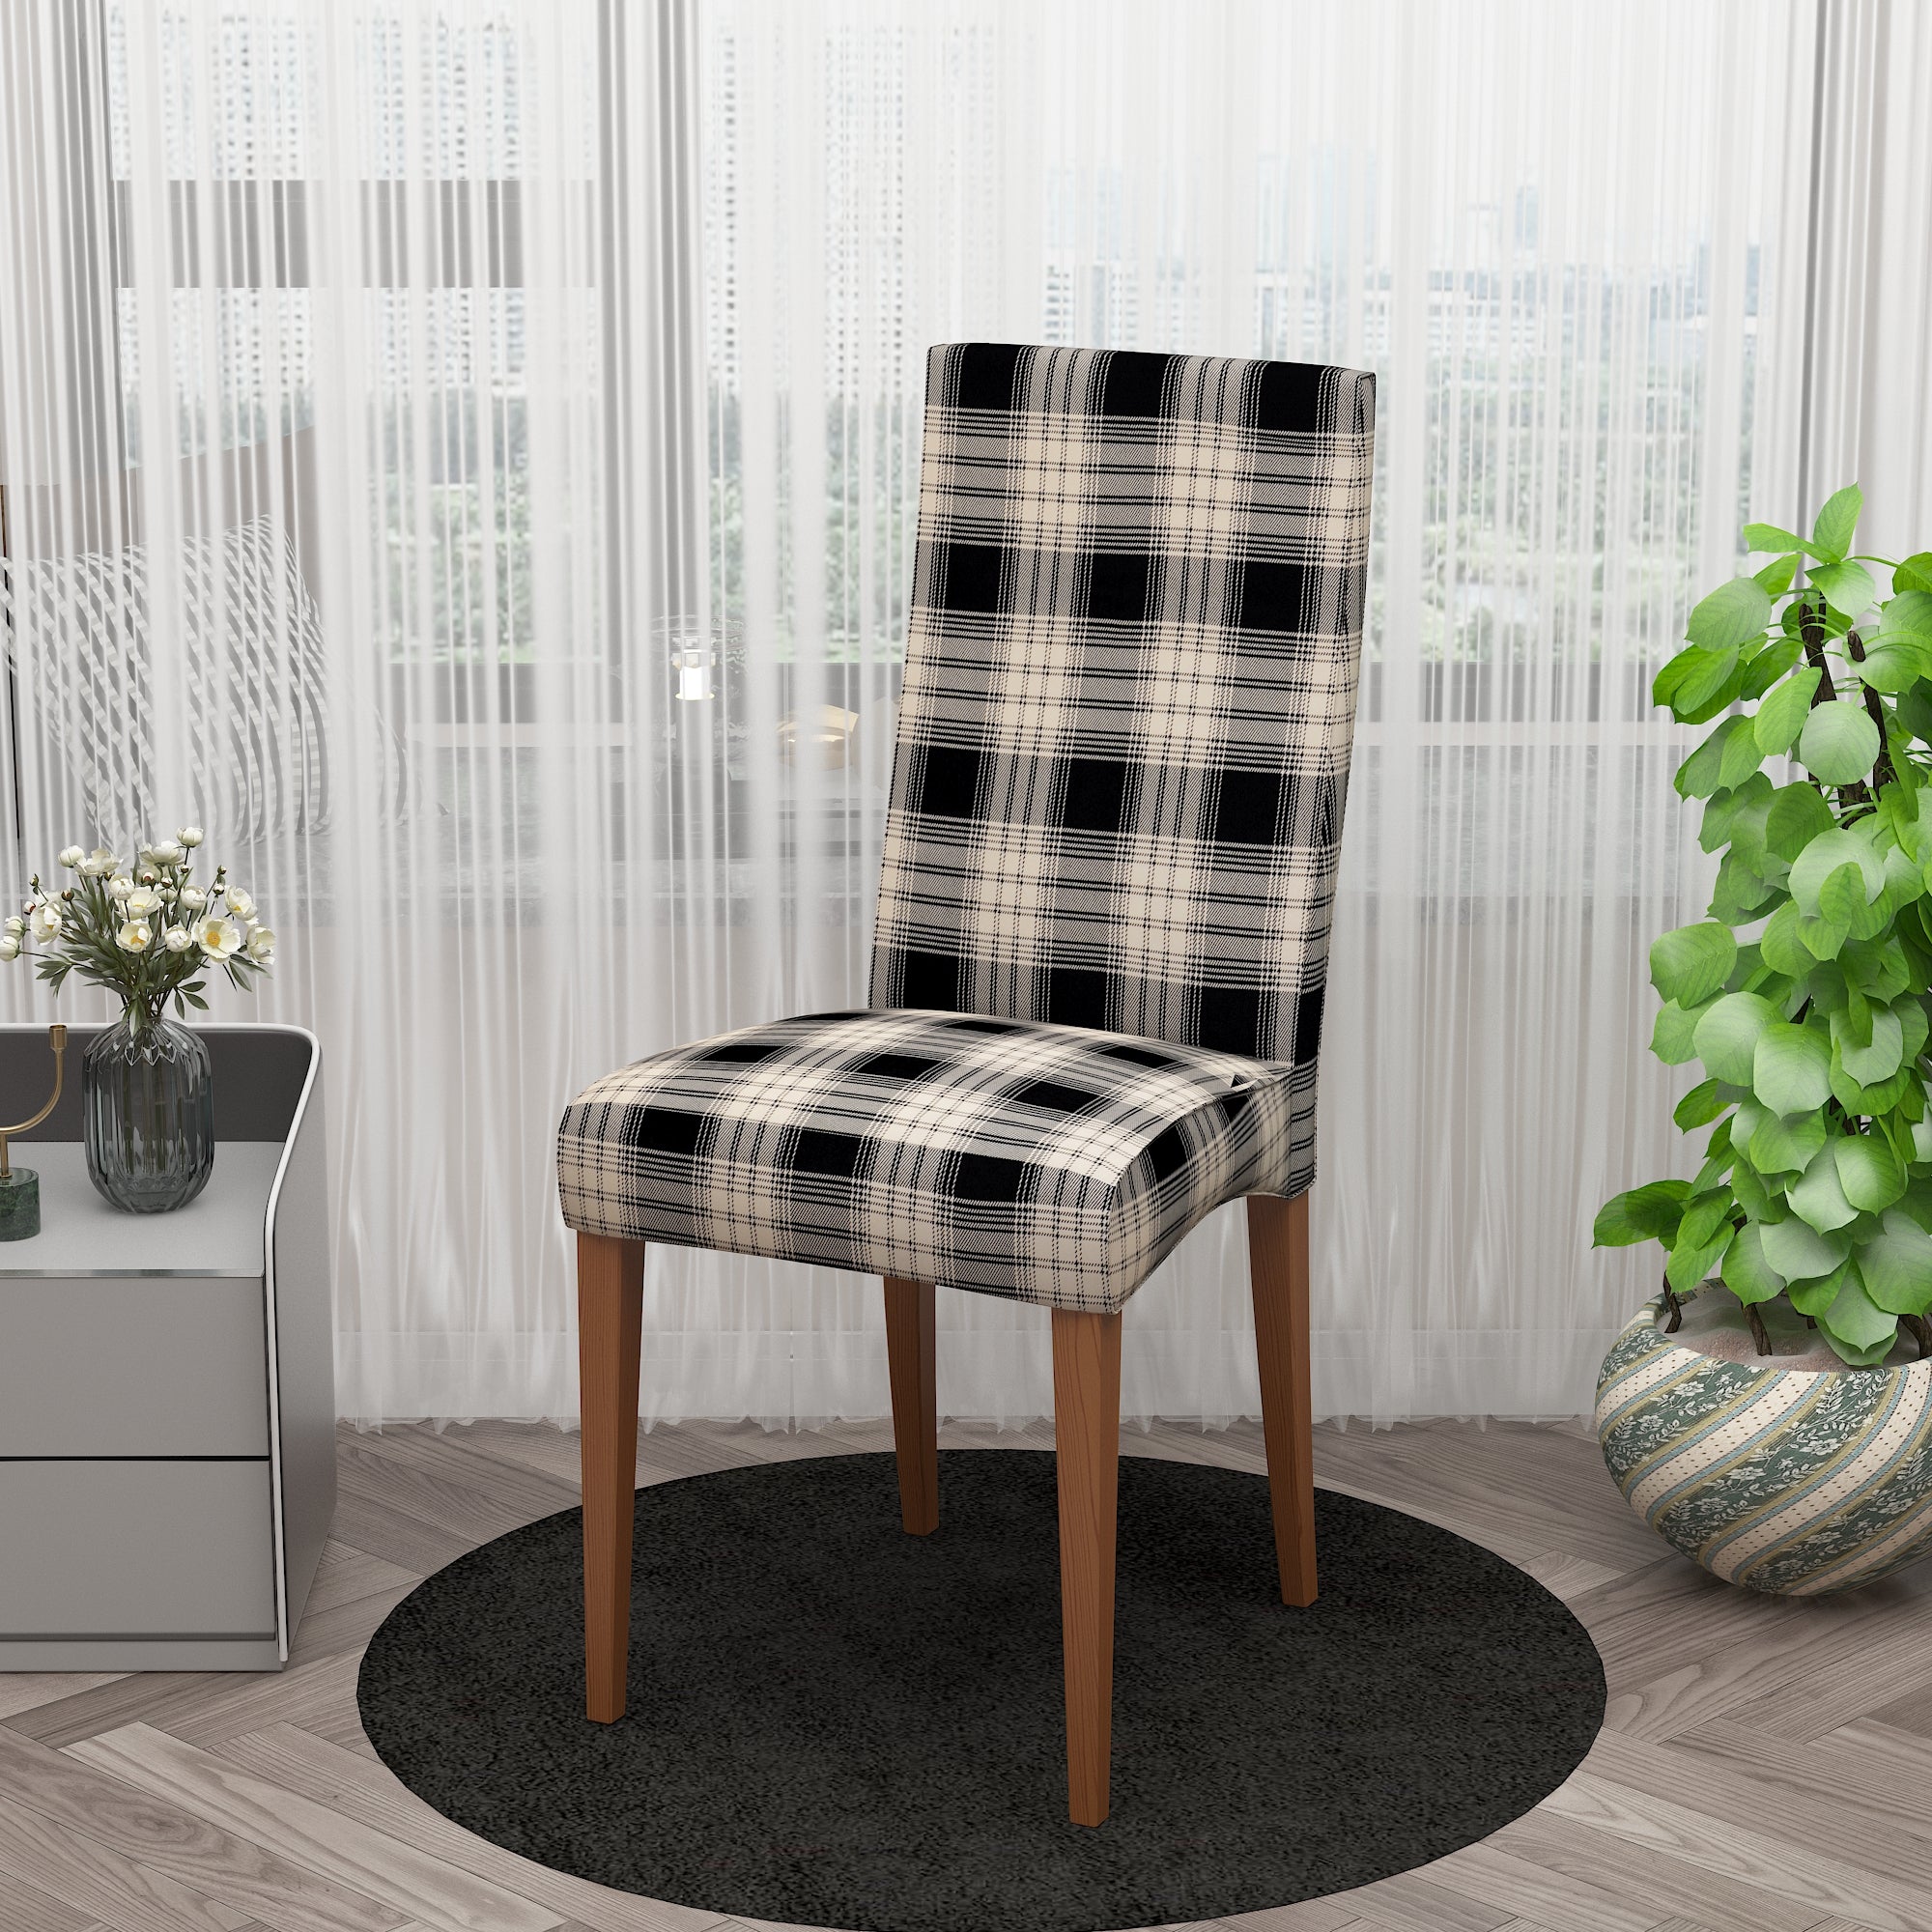 Polyester Spandex Stretchable Printed Chair Cover, MG07